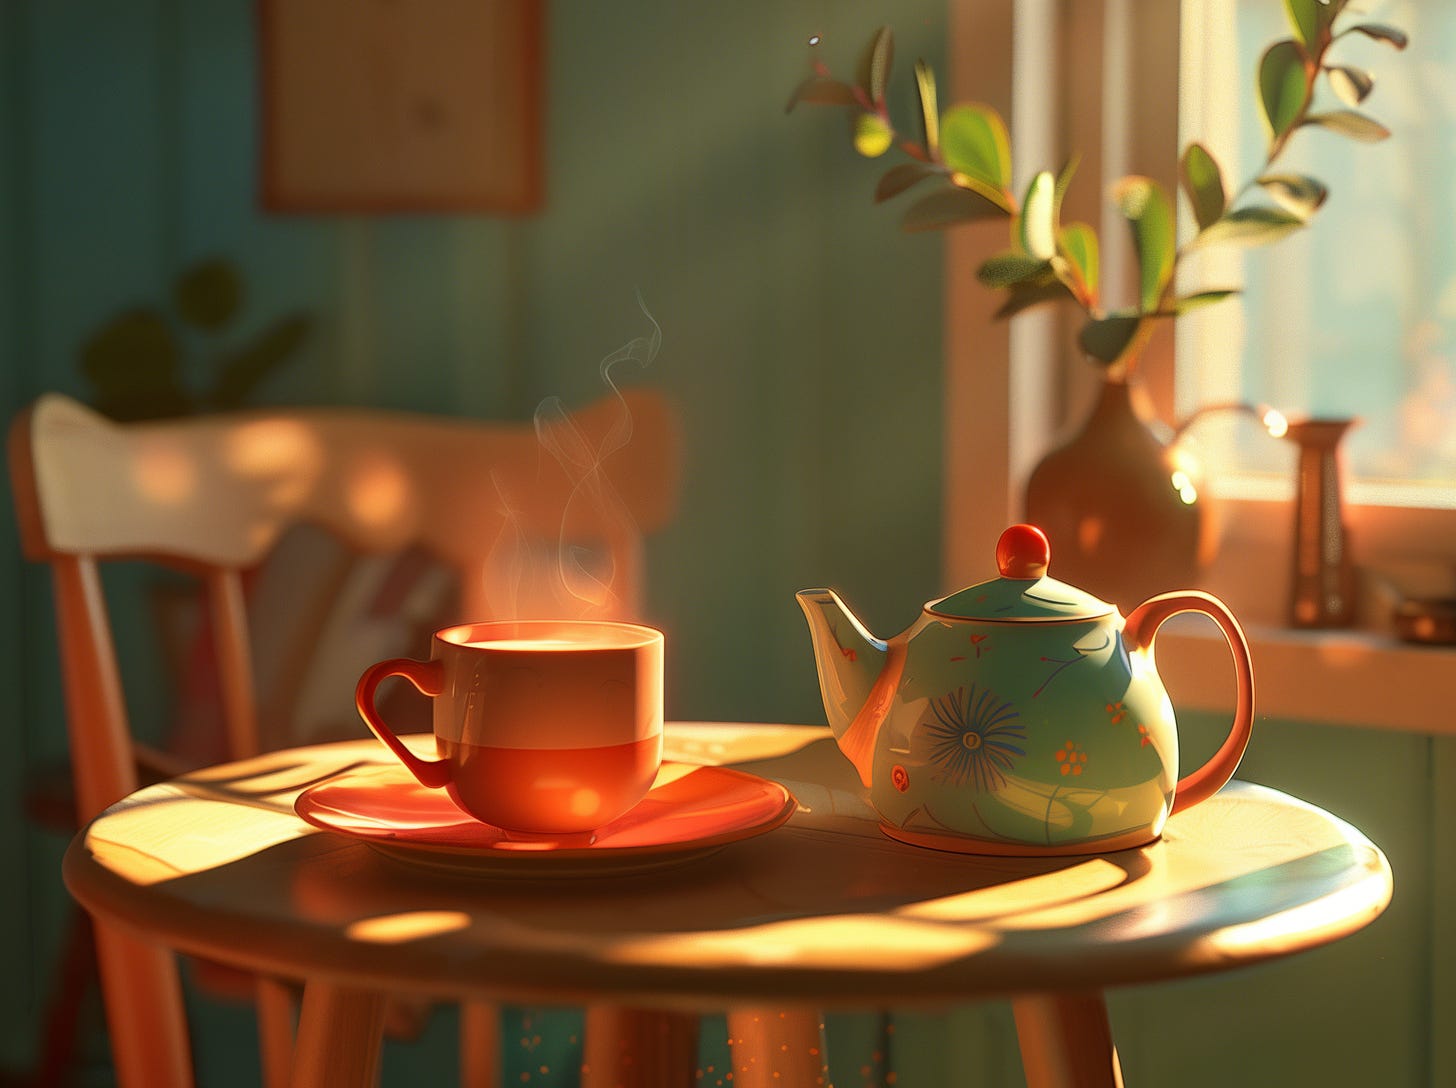 Dappled light shining through window on a small table with a steaming cup of tea and a tea kettle.